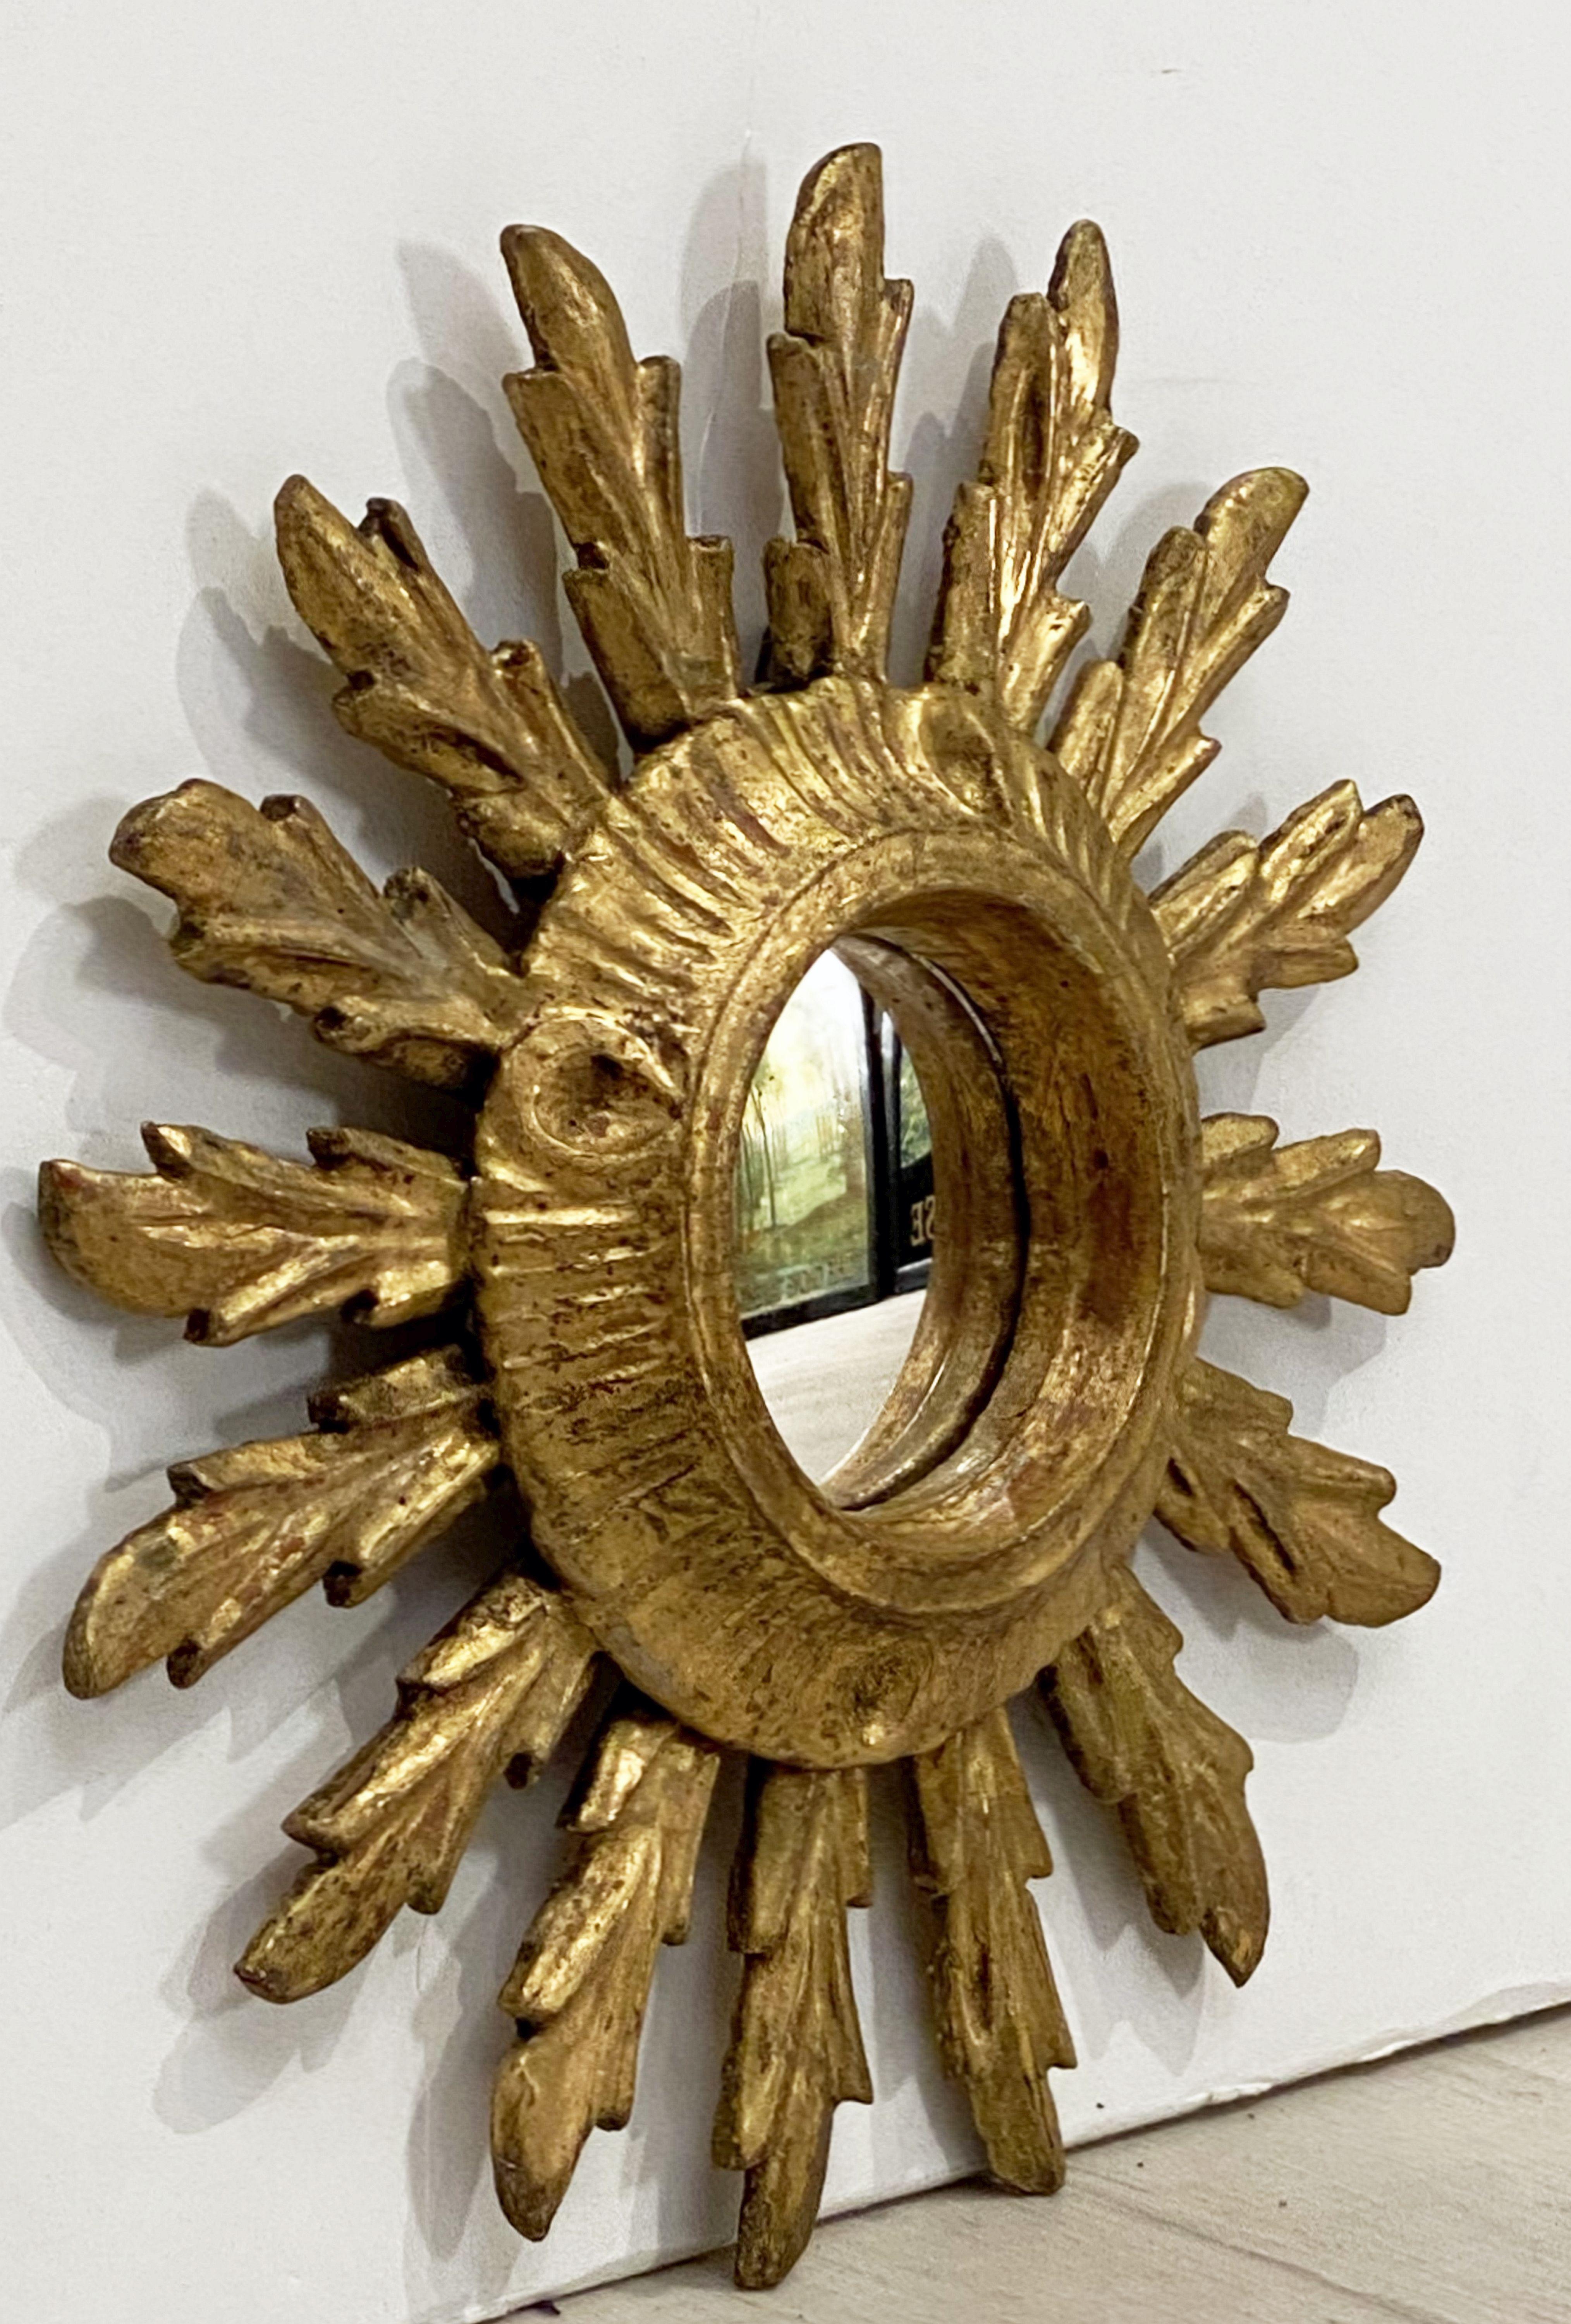 A lovely French gilt sunburst (or starburst) mirror with round convex mirrored glass center in moulded giltwood frame - the bright gilded rays resembling plumes of feathers.

Measures: Diameter of 9 1/2 inches.


 